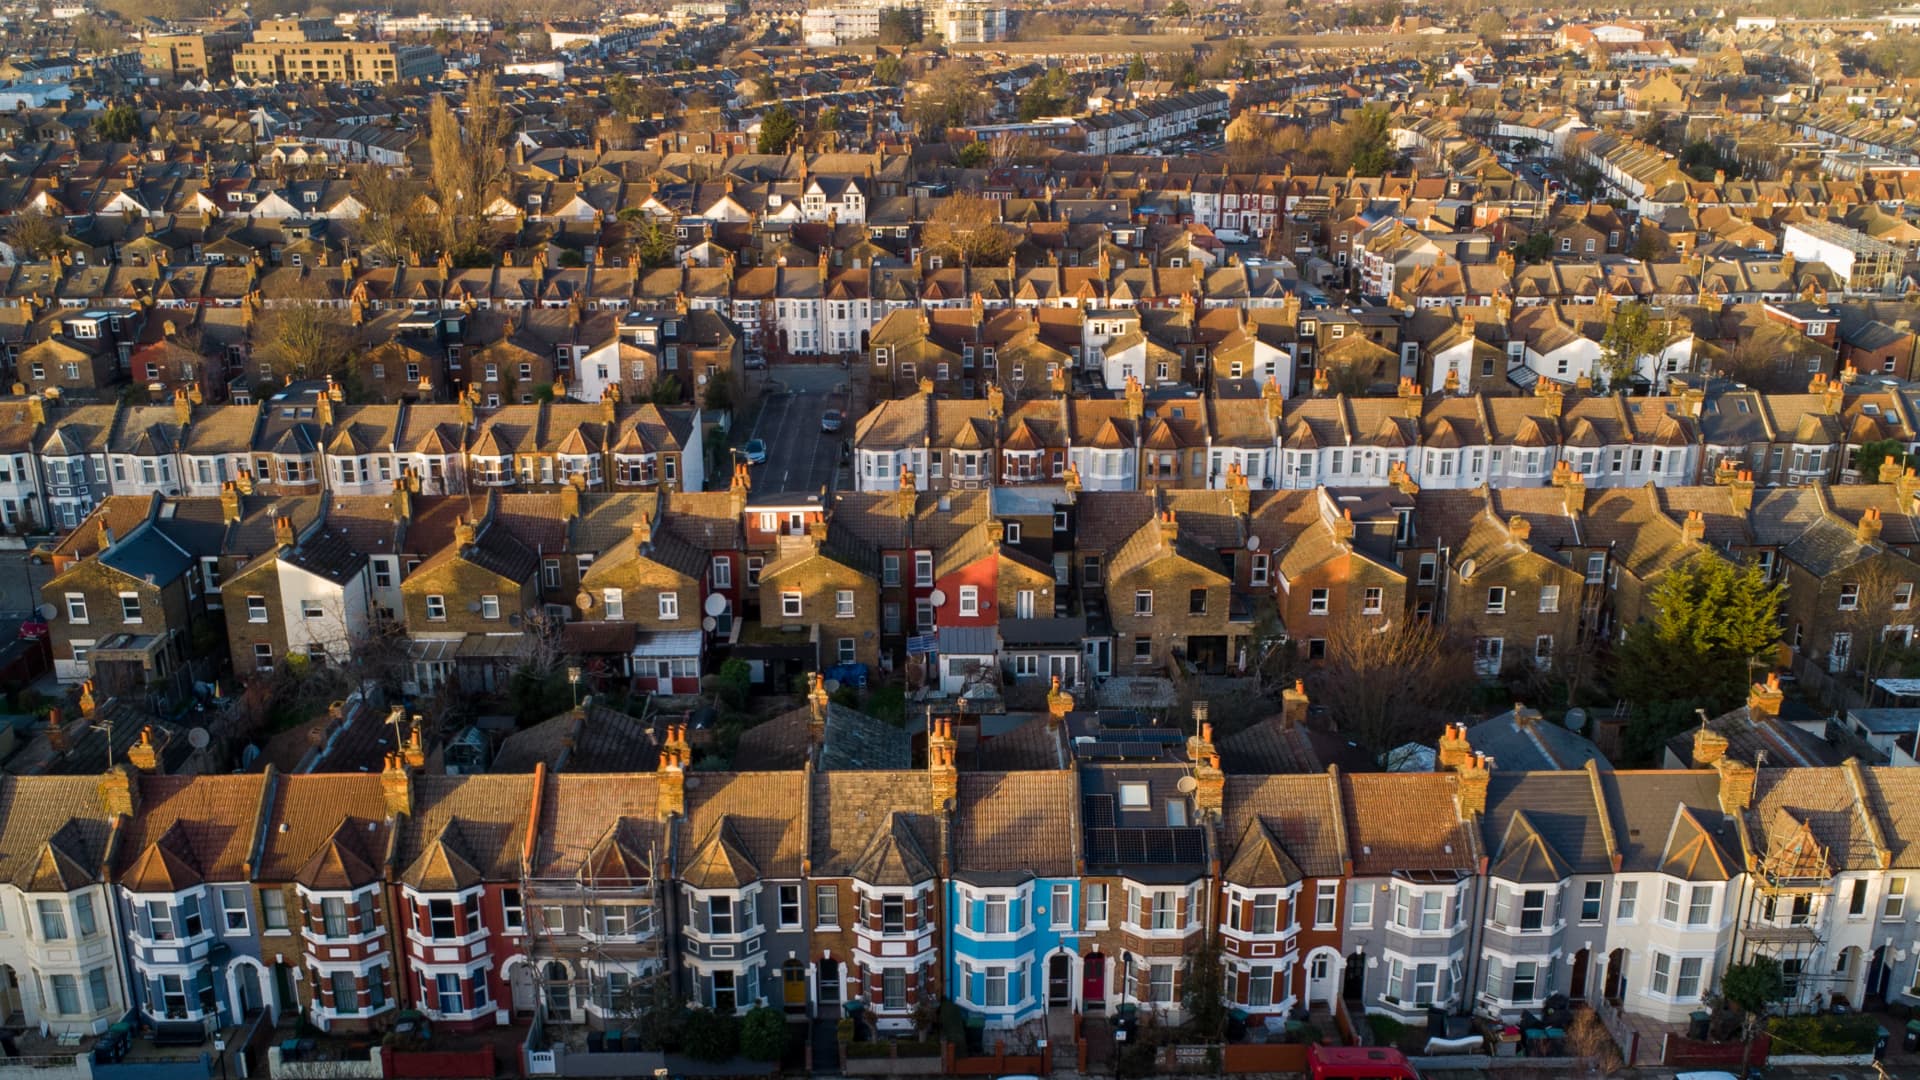 Britain's house prices are slumping as mortgage rates soar â€” and there could be worse to come